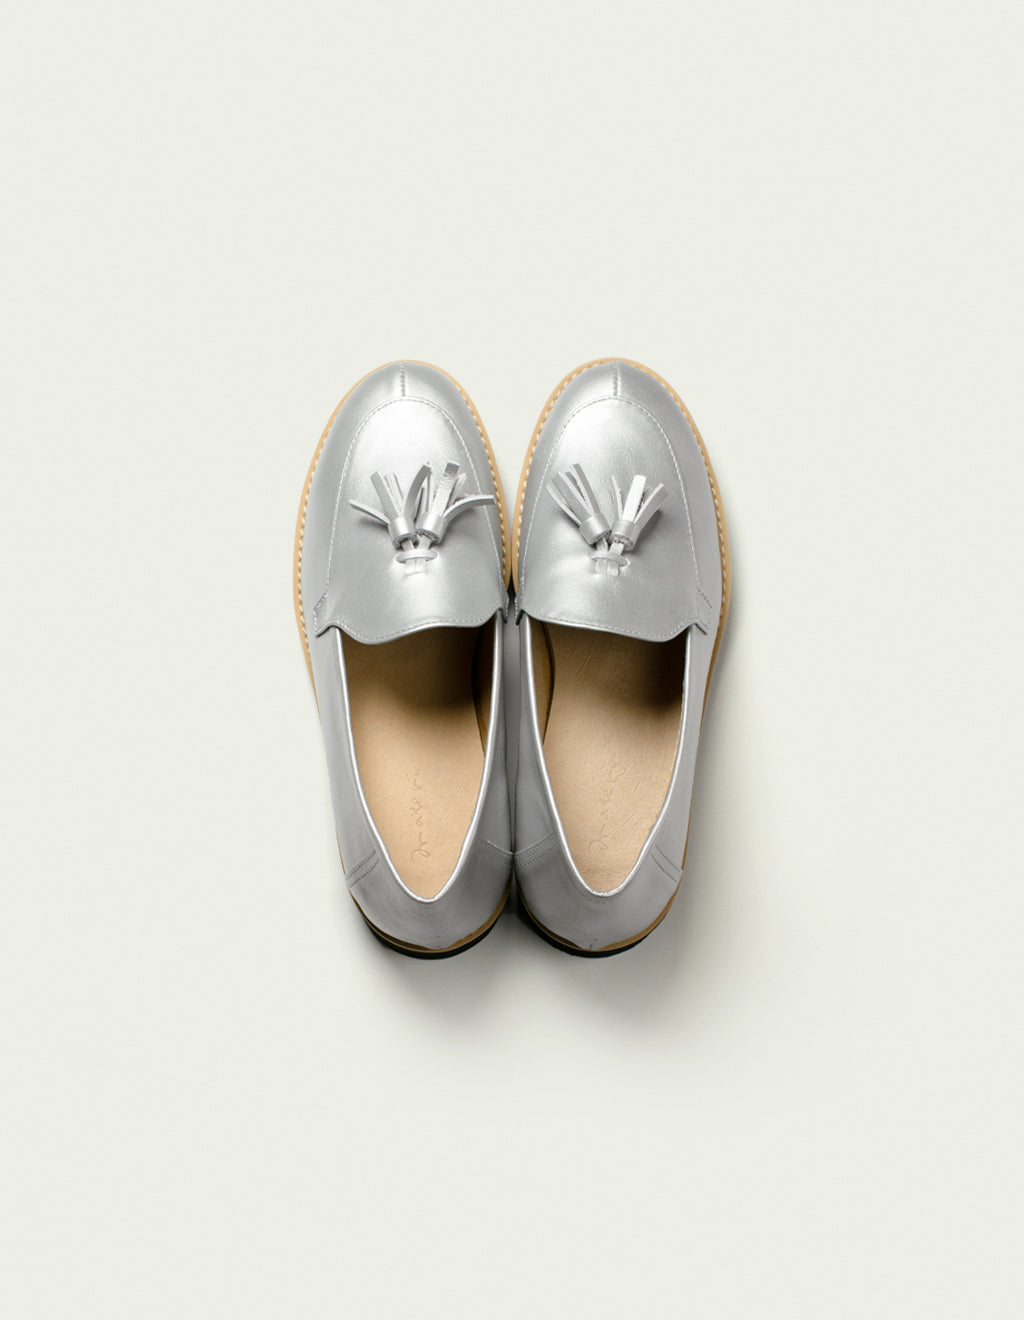 【 materi 】 a-02 | Leather Shoes | Silver